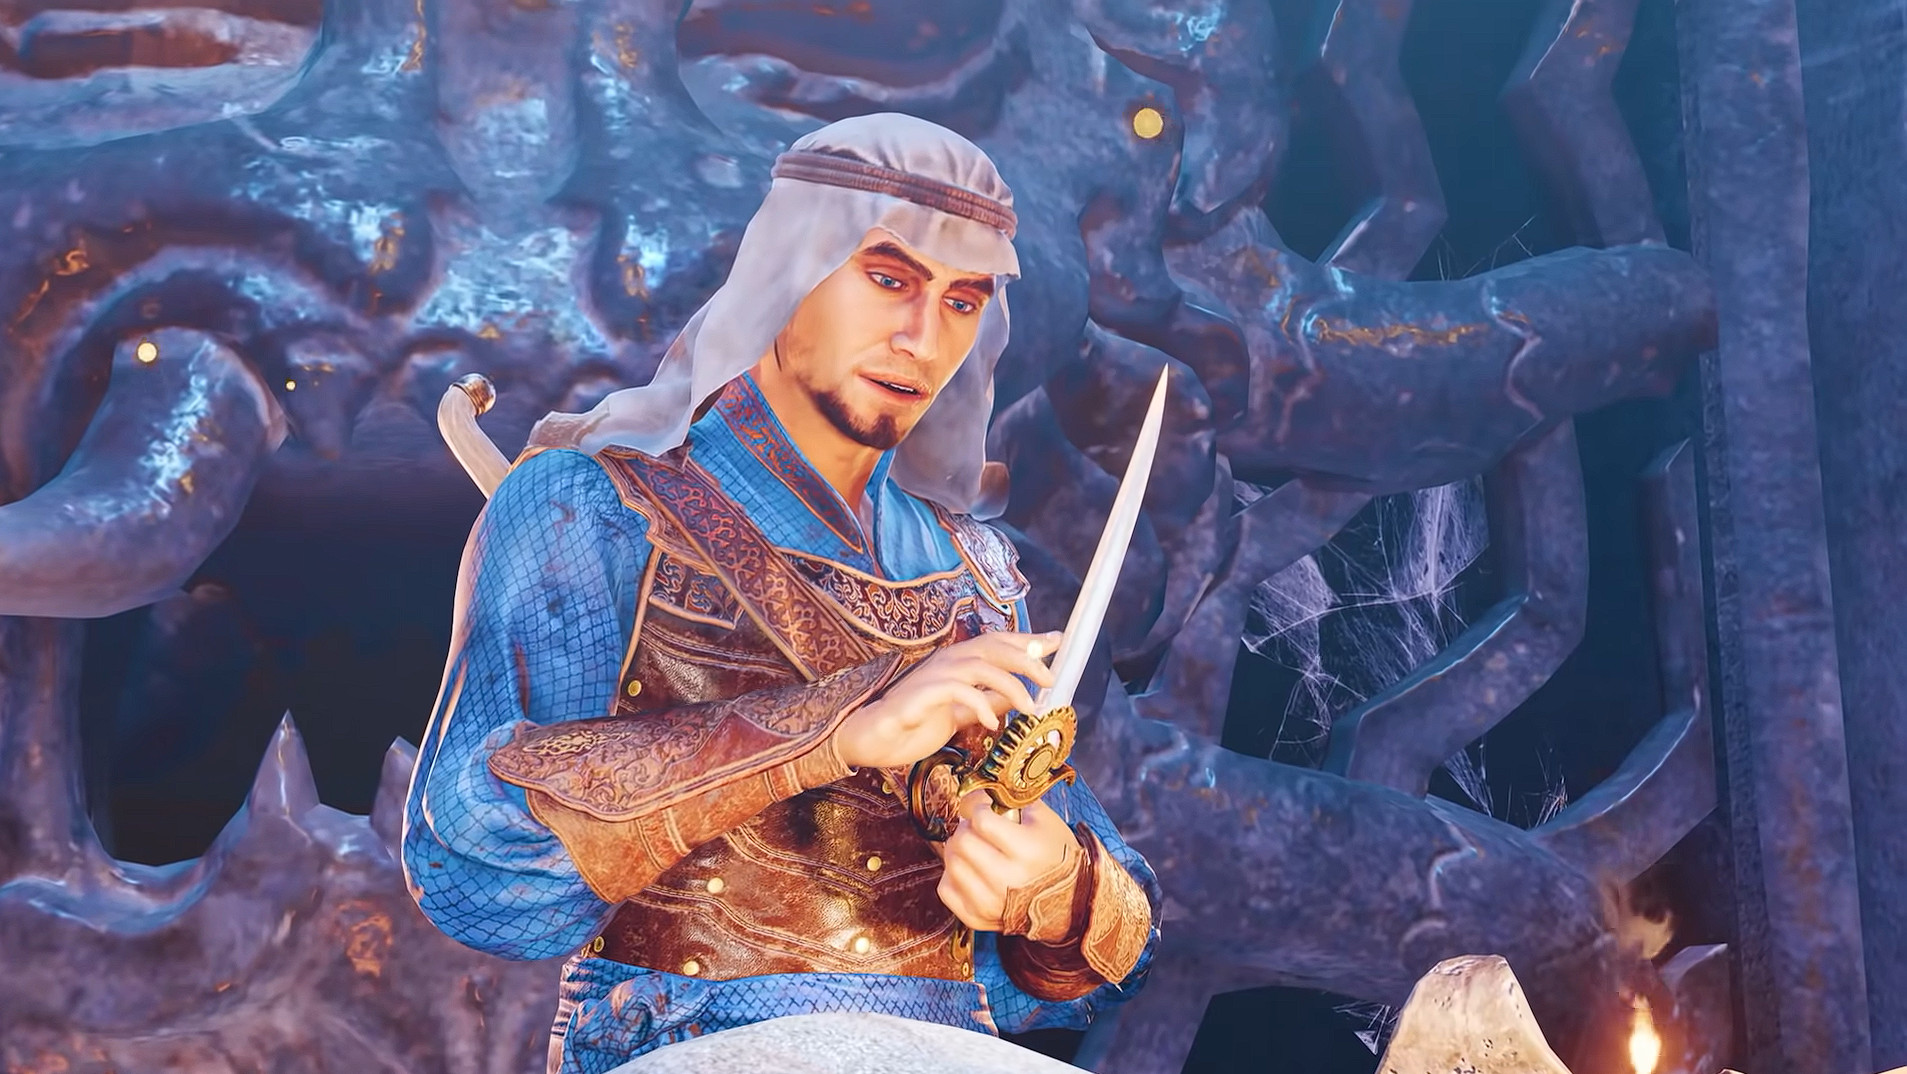 Prince of Persia: The Sands of Time Remake is aiming for 2022-23